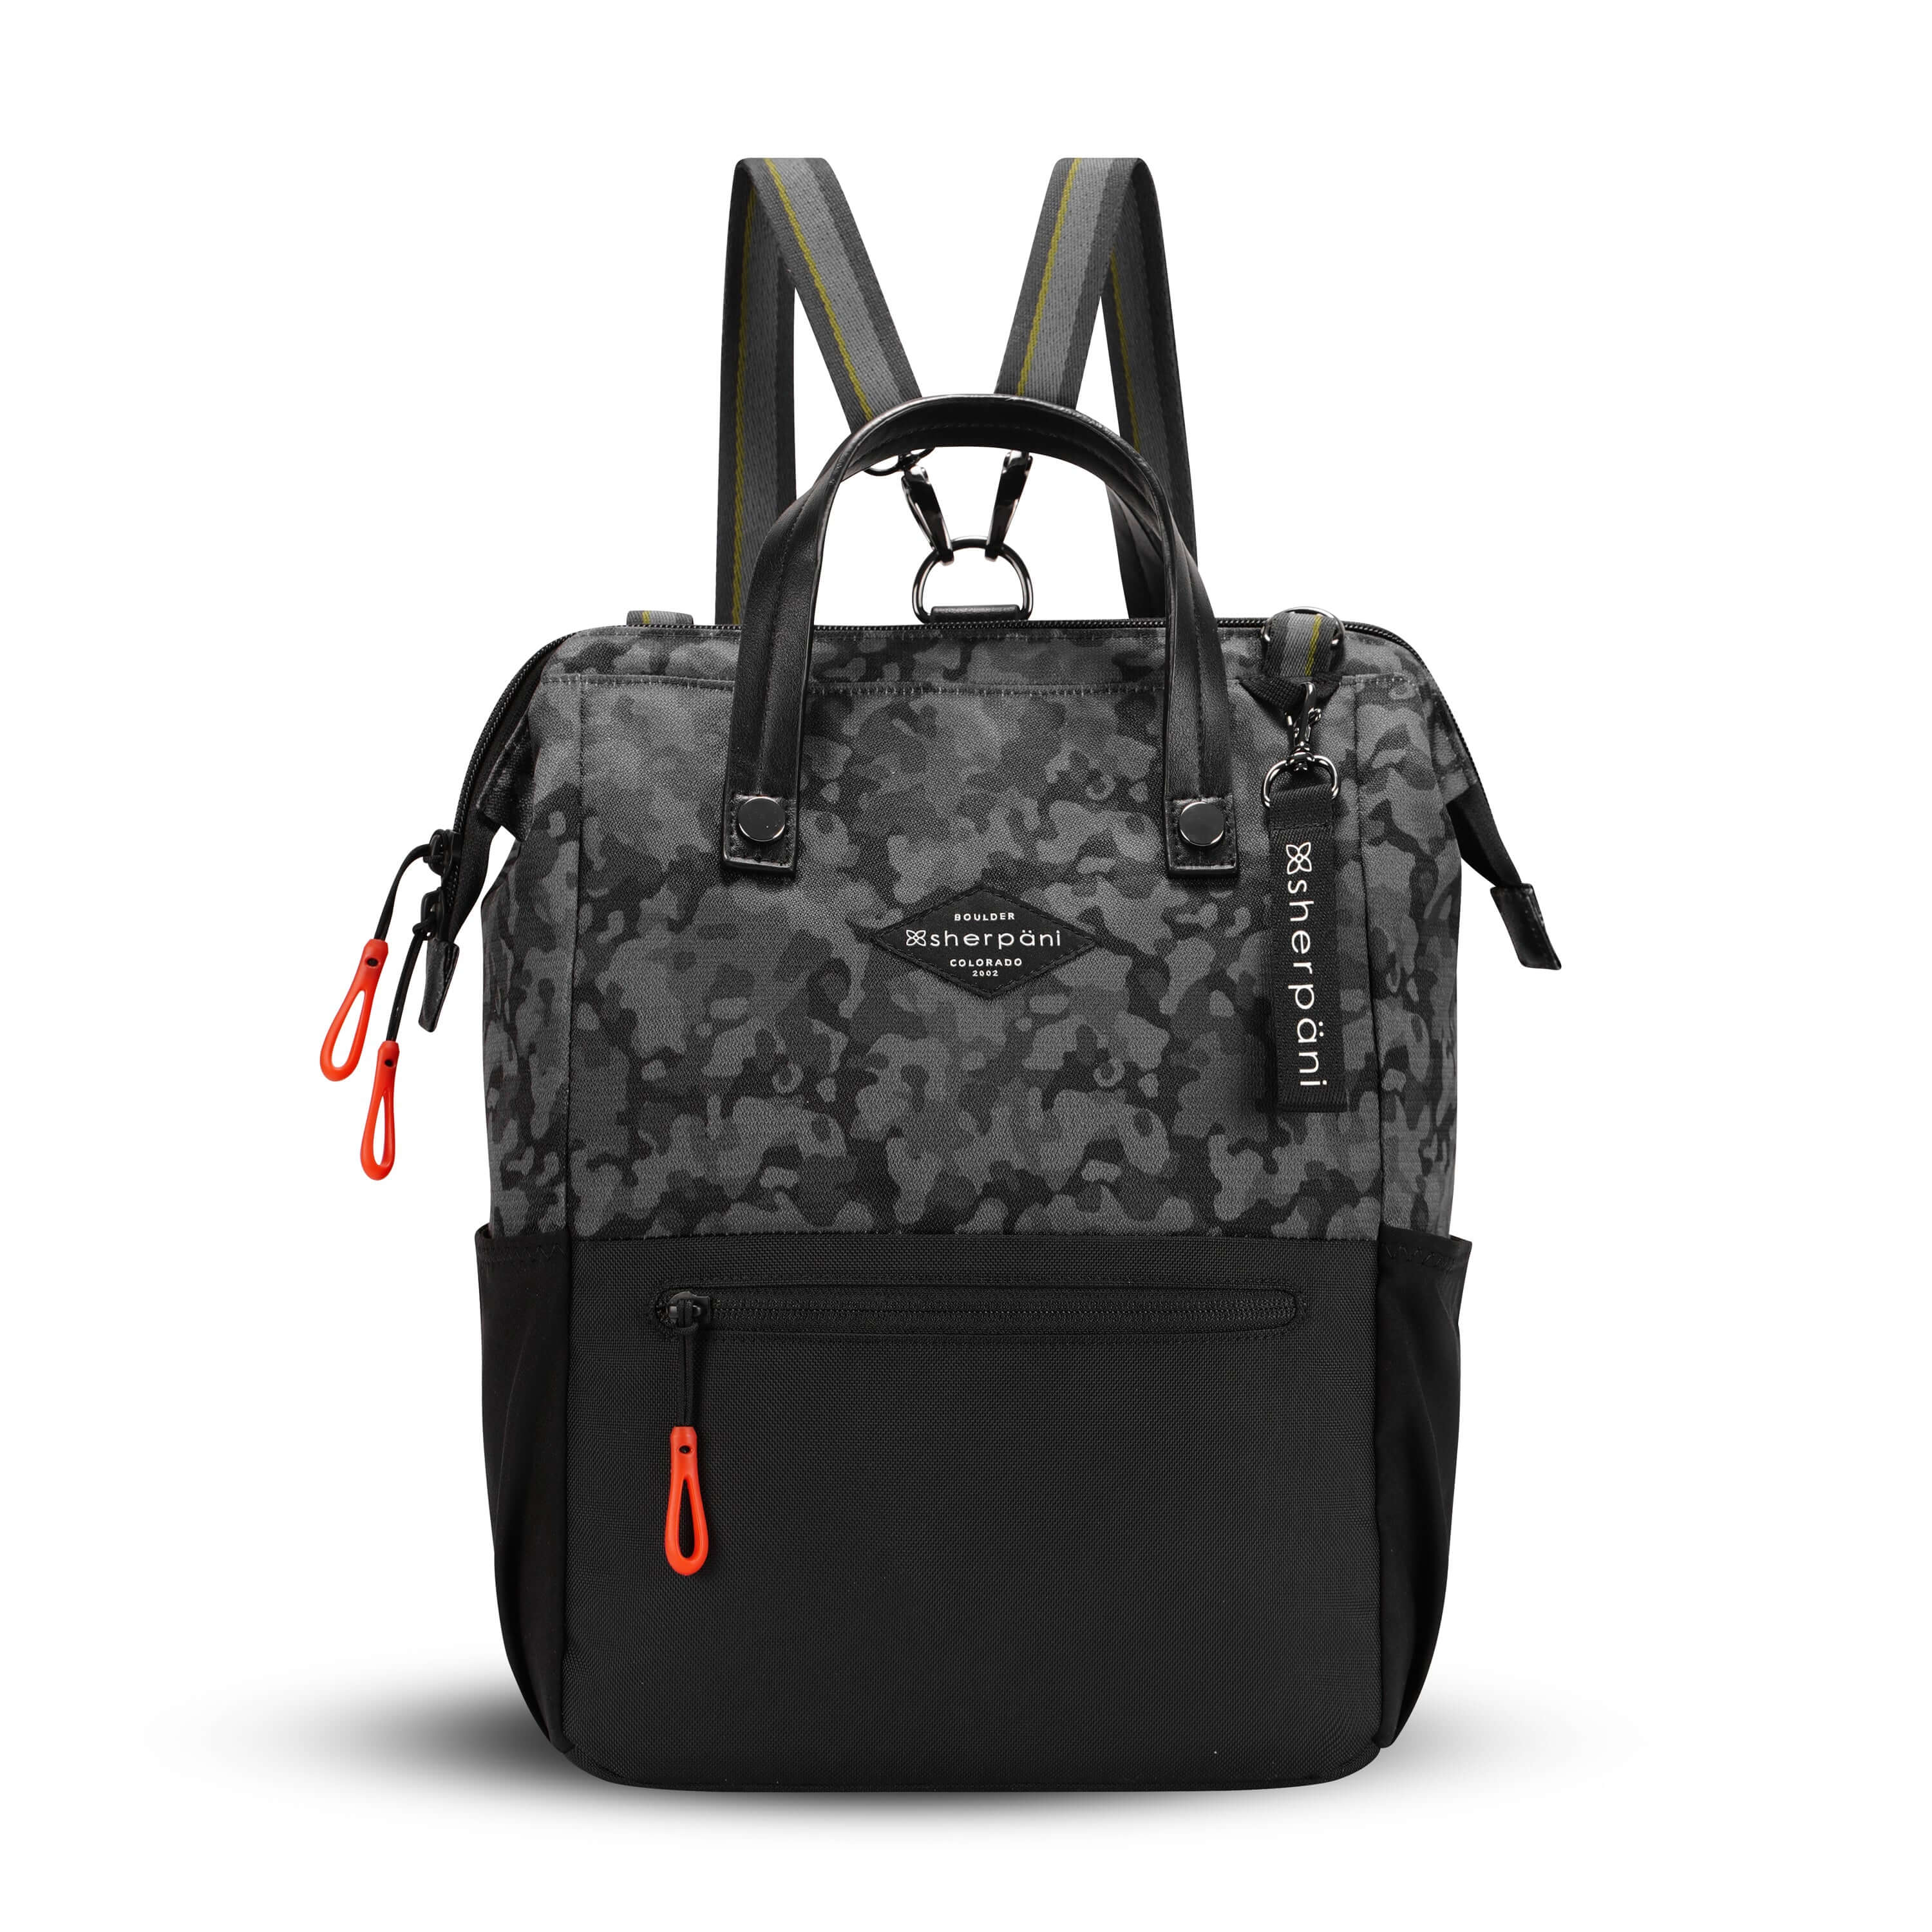 Flat front view of Sherpani three-in-one bag, the Dispatch in Dream Camo. The bag is two-toned: the top is a camouflage pattern of black and gray, and the bottom is black. There is an external zipper pocket on the front panel. Easy-pull zippers are accented in red. A branded Sherpani keychain is clipped to the upper right corner. Elastic water bottle holders sit on either side of the bag. It has short tote handles and adjustable/detachable straps that can function for a backpack or crossbody.